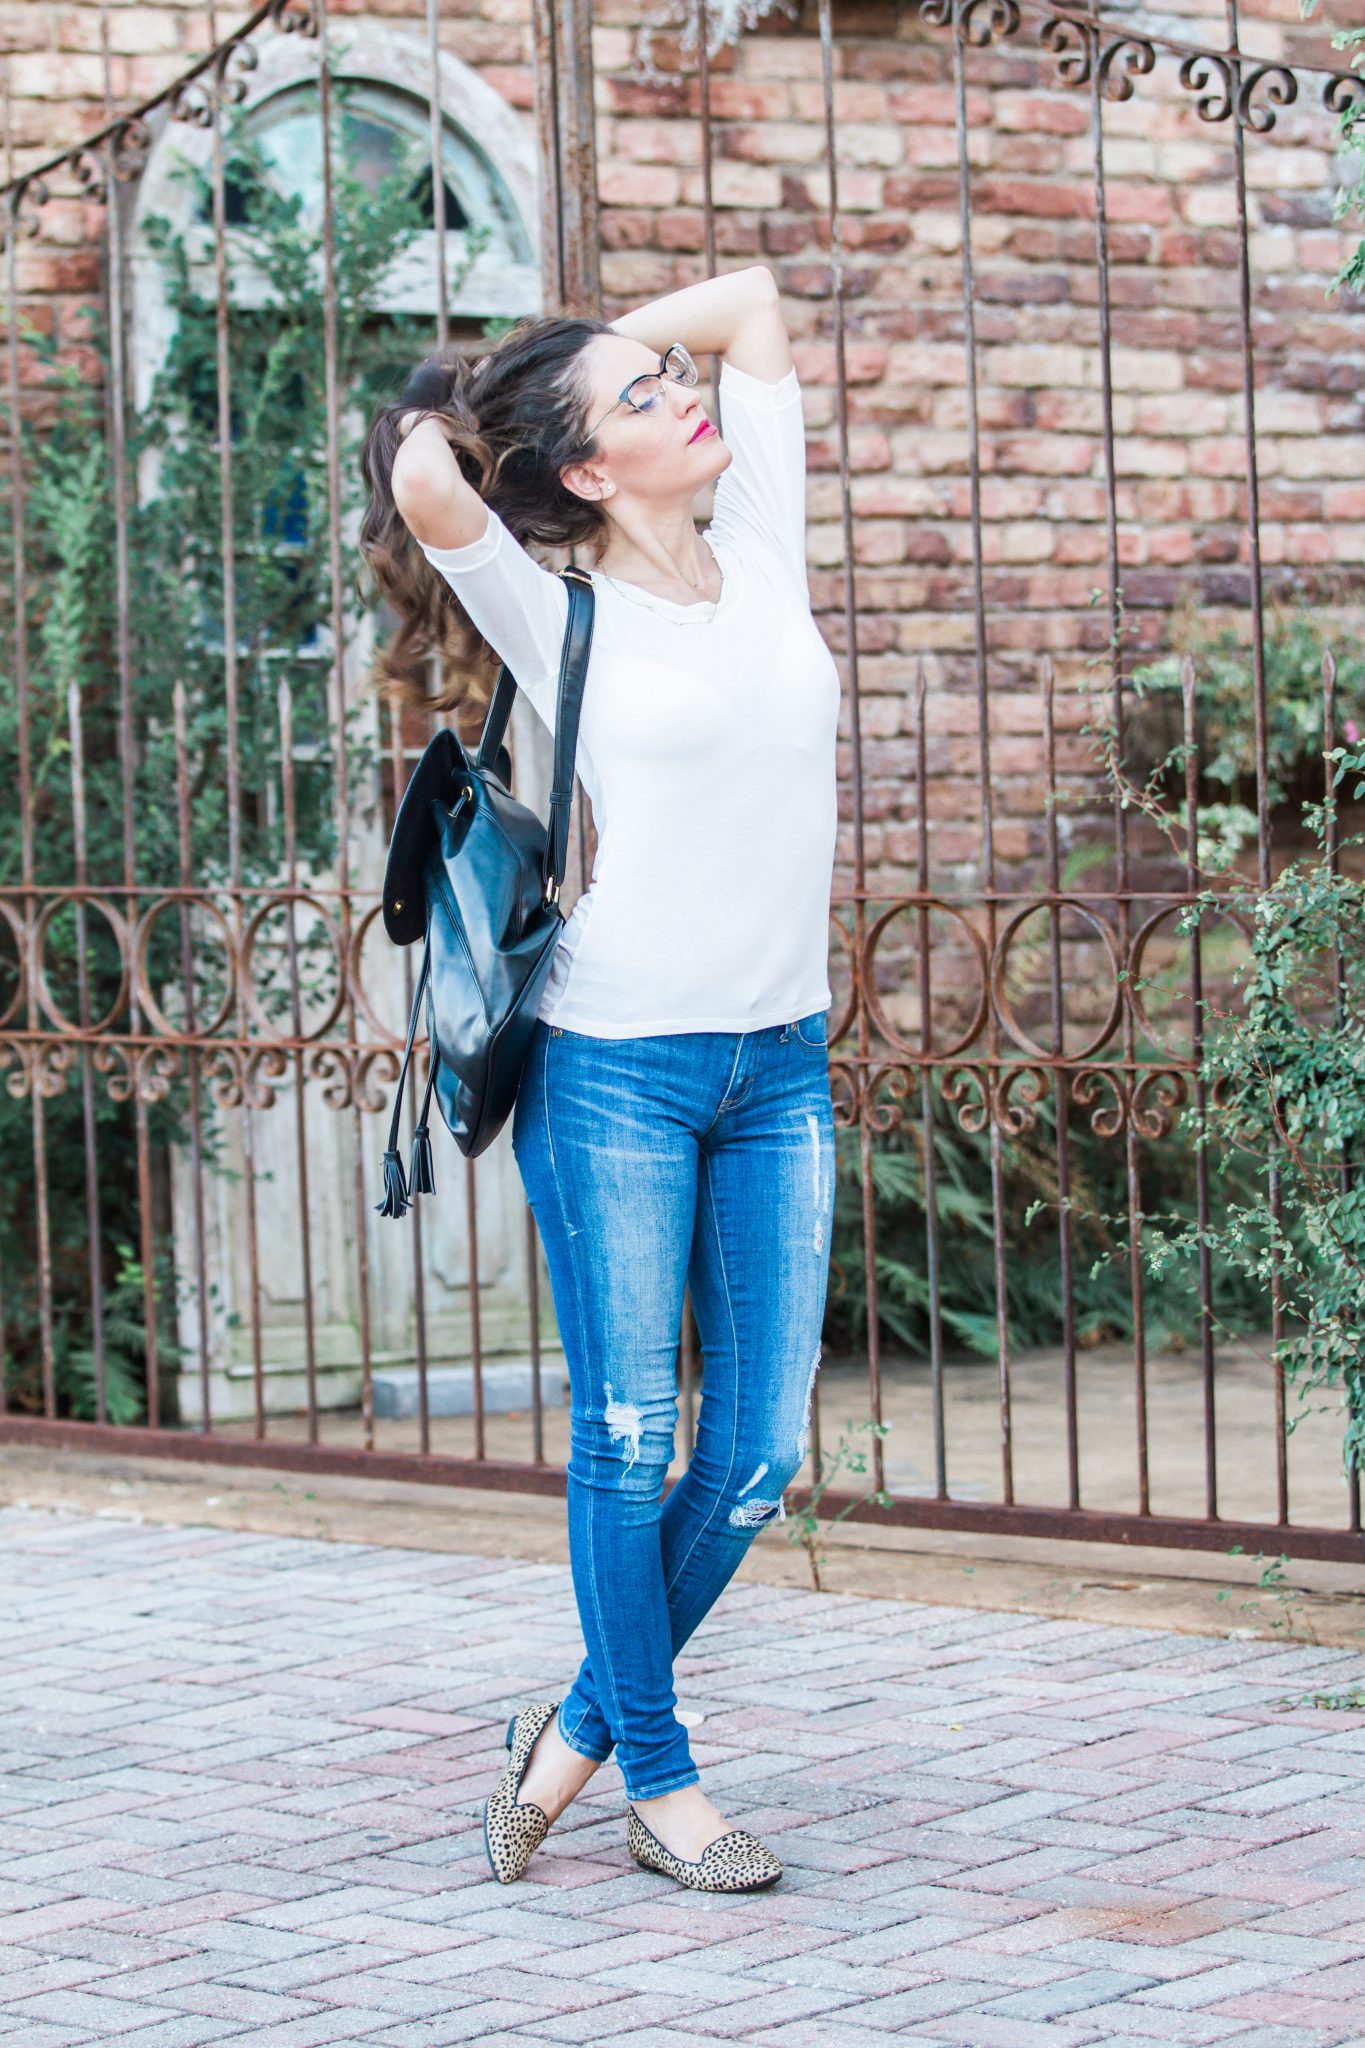 classic white tee and jeans for fall, classic fall style, simple fall style, how to wear a t shirt and jeans, red lipstick